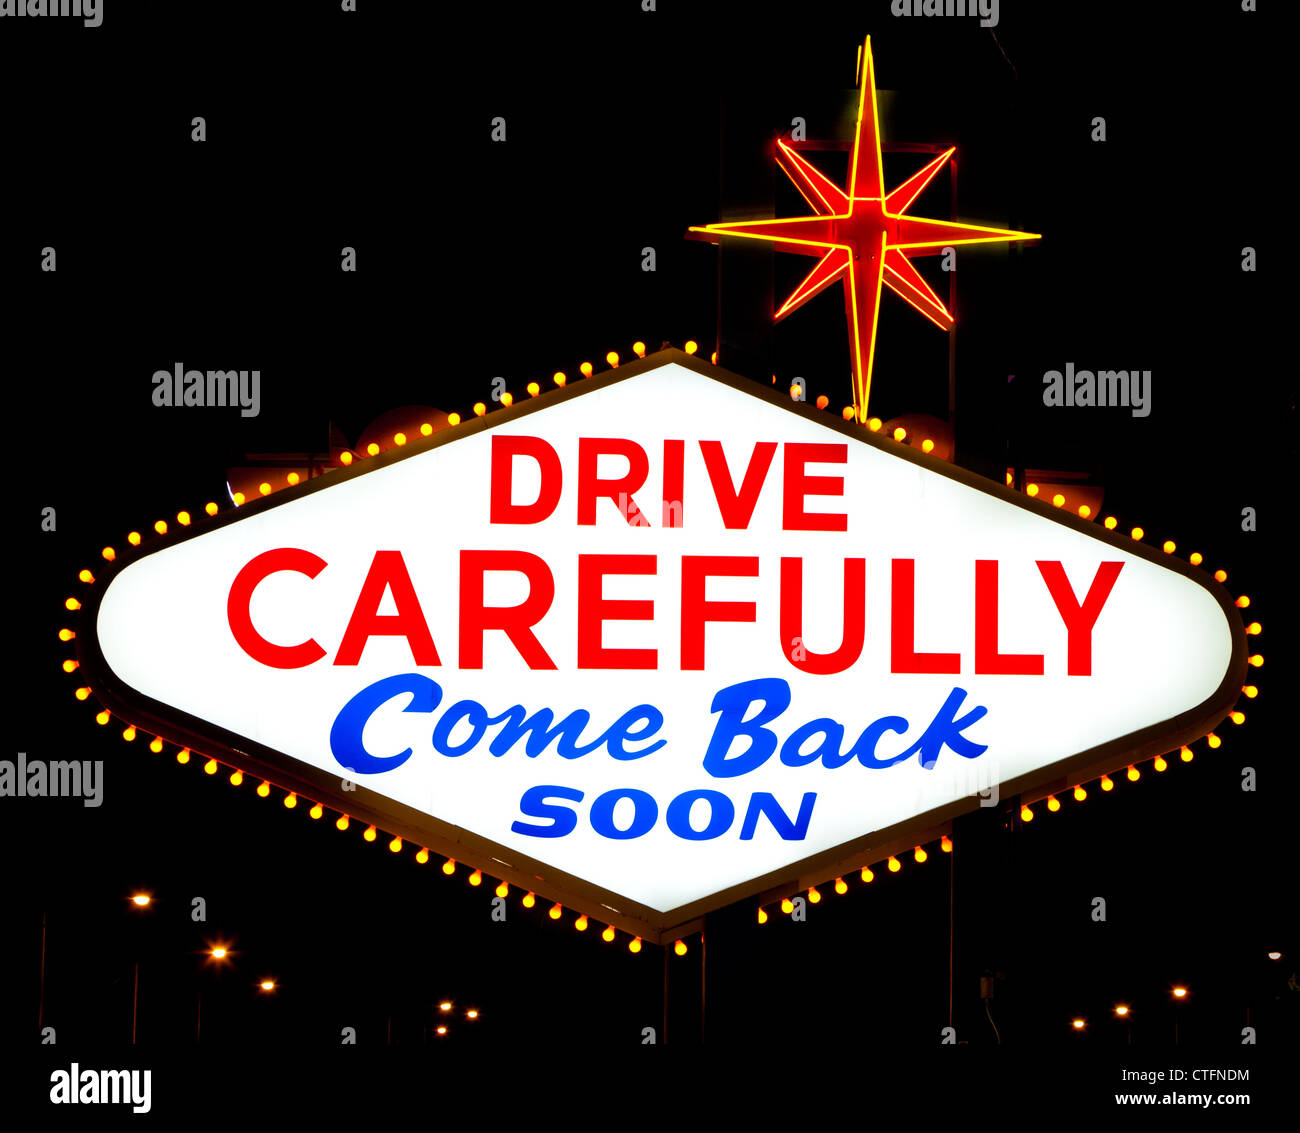 The reverse of the Las Vegas sign reading 'Drive Carefully' Stock Photo